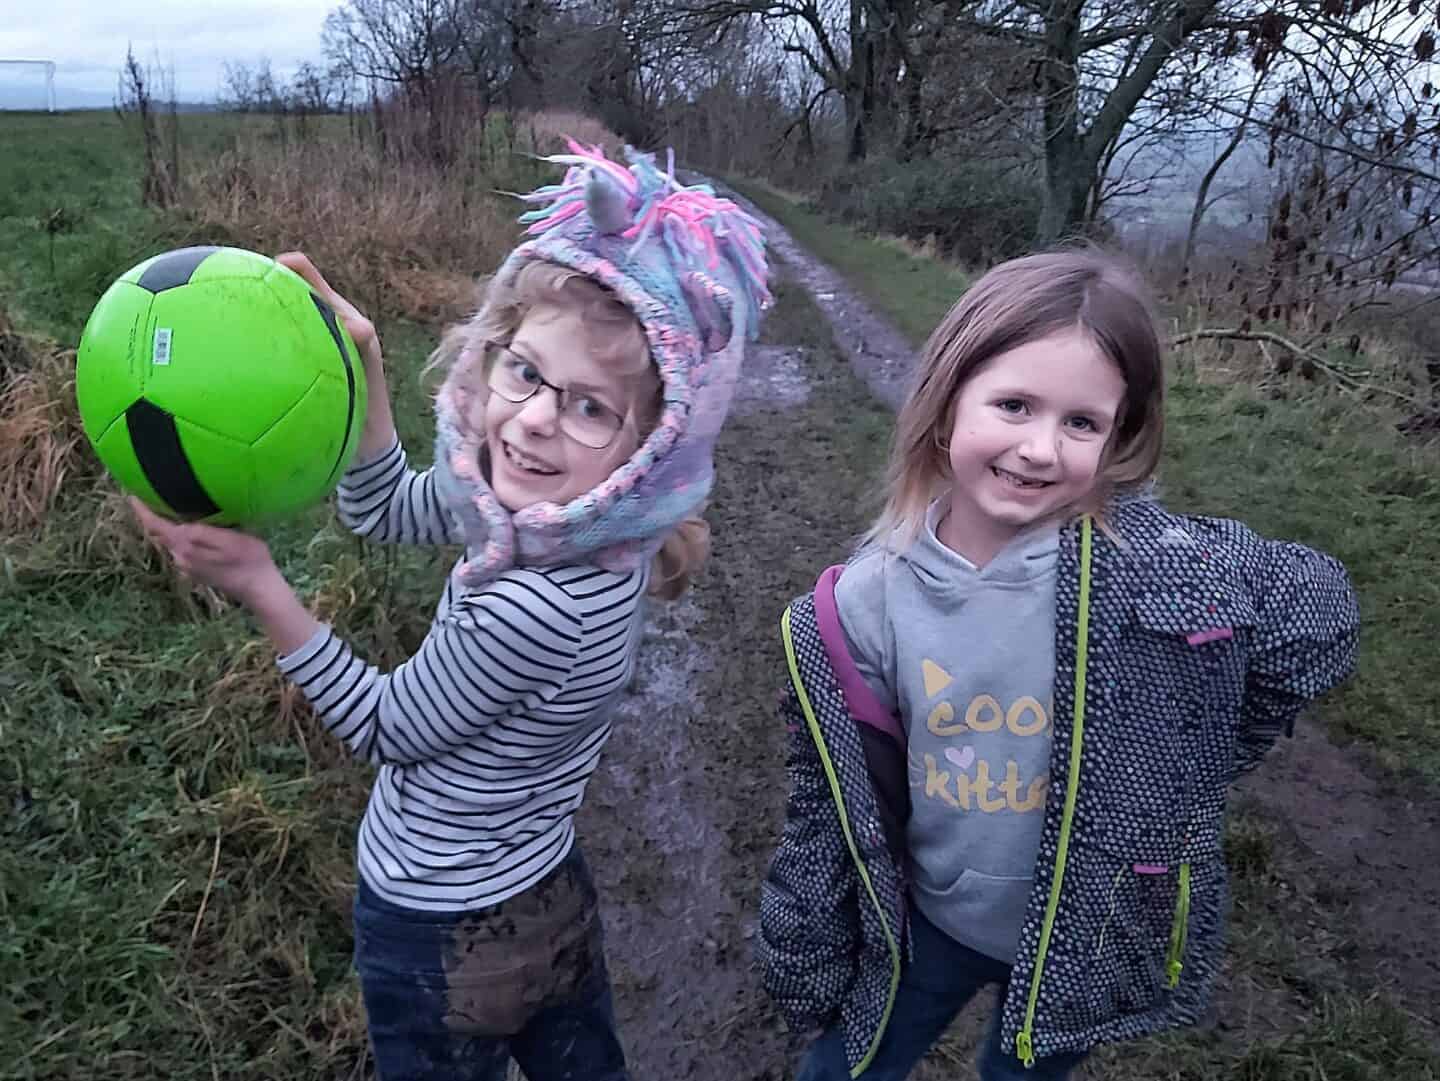 birthday gifts by age: Two girls covered in mud showing off the football they received for Christmas